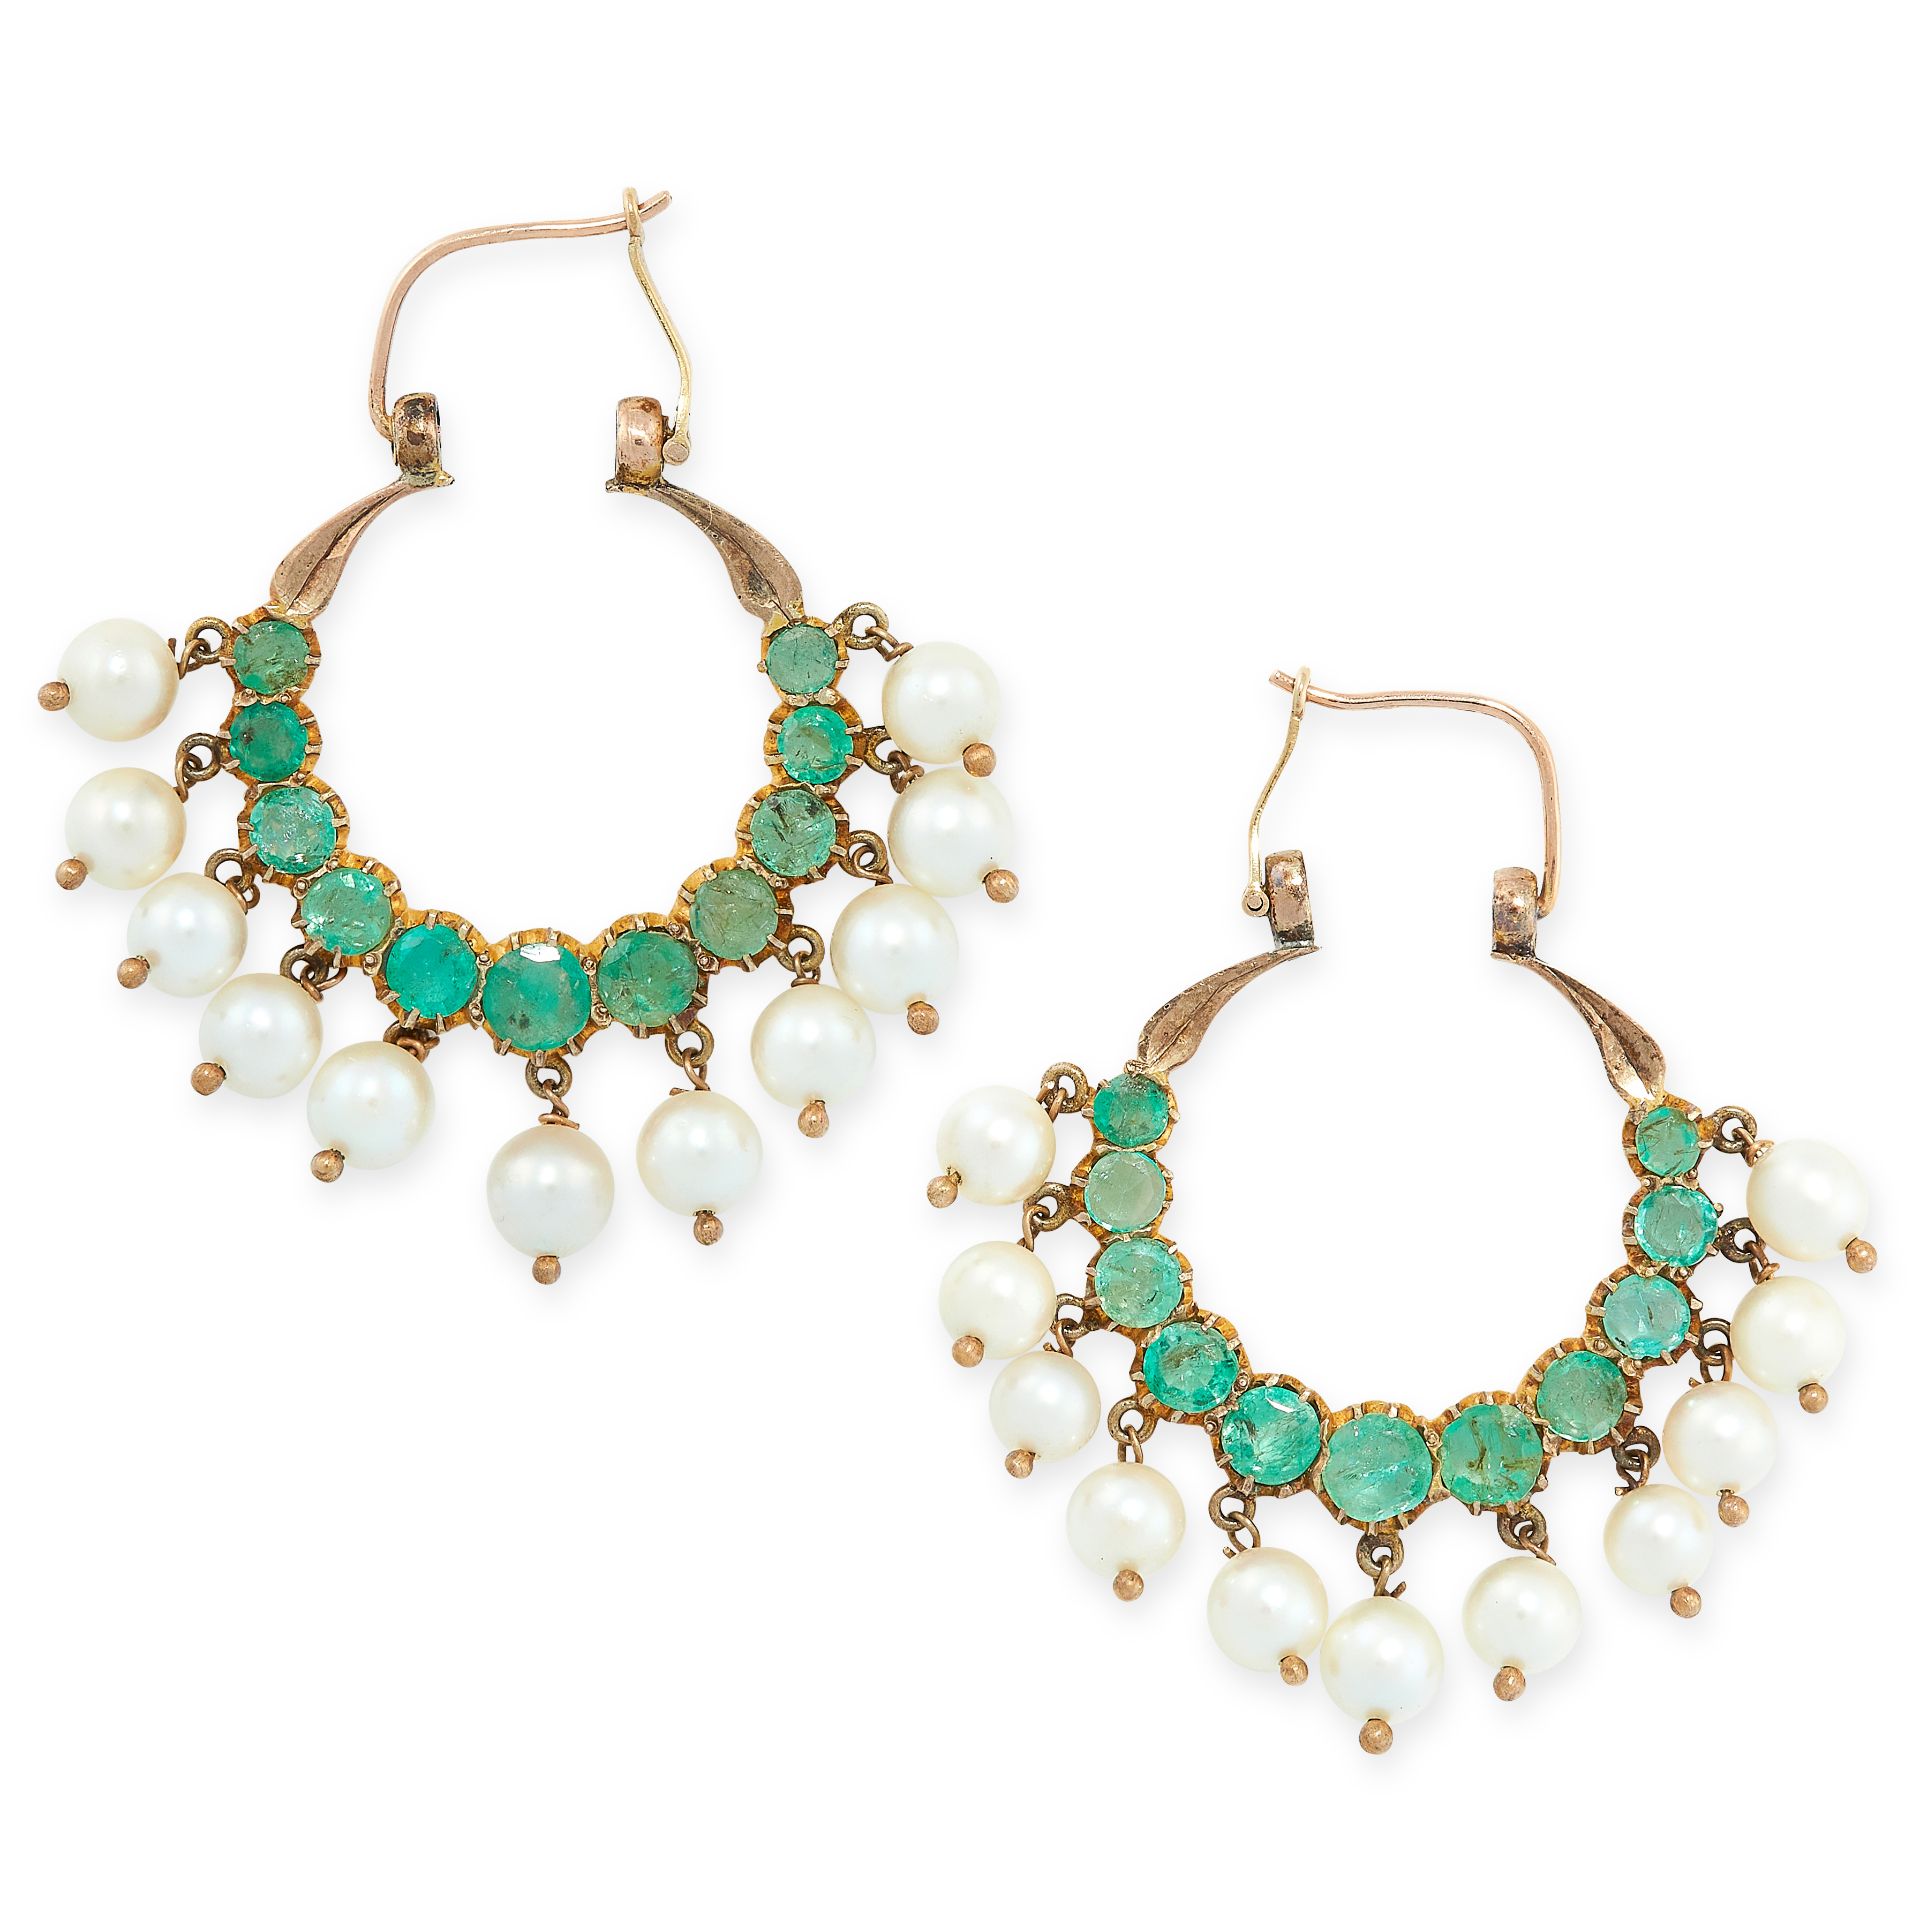 PAIR OF EMERALD AND PEARL EARRINGS each of hoop design, set with circular-cut emeralds and